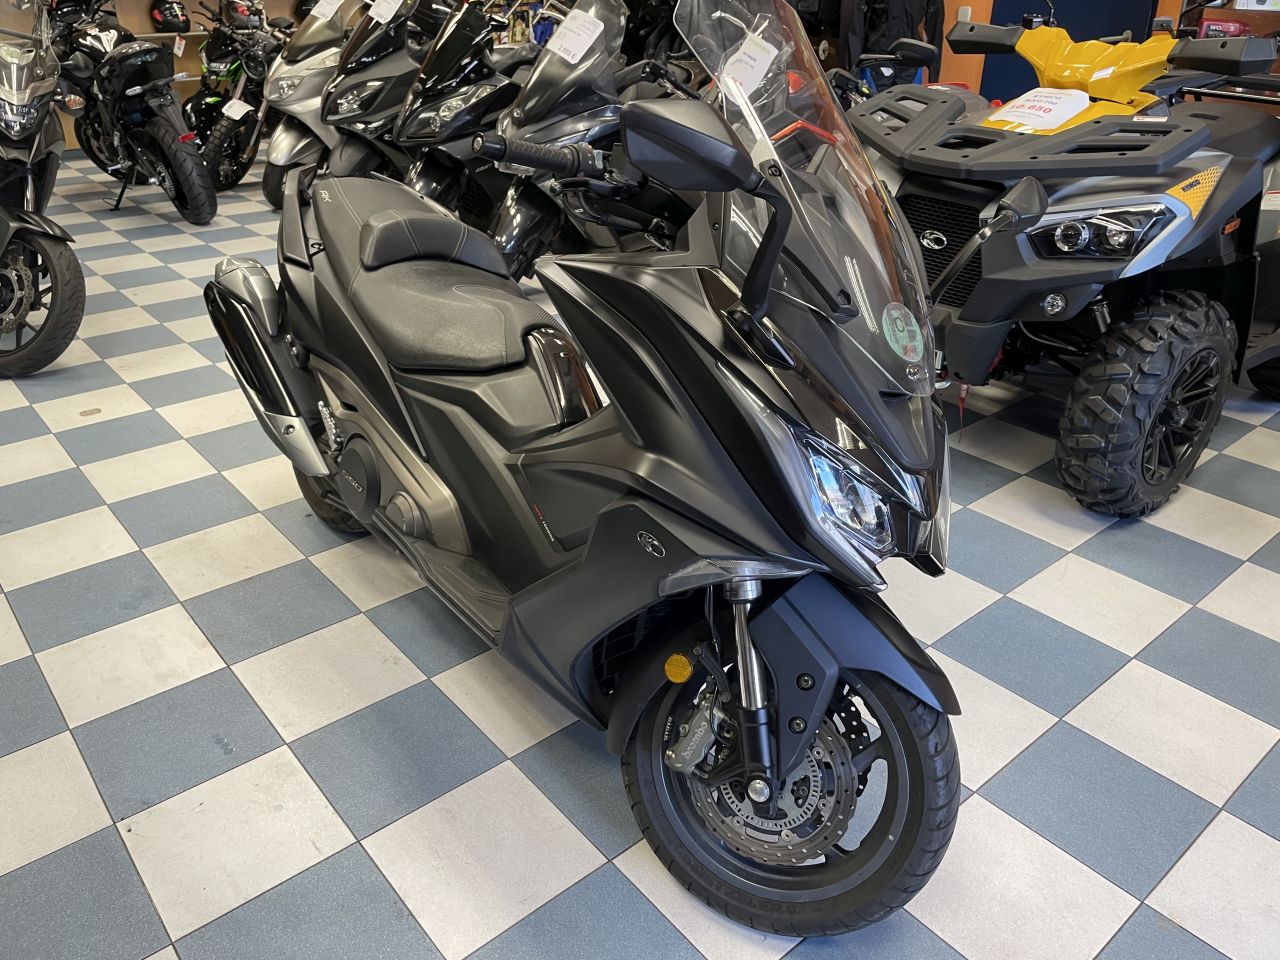 KYMCO XCITING 500 ABS